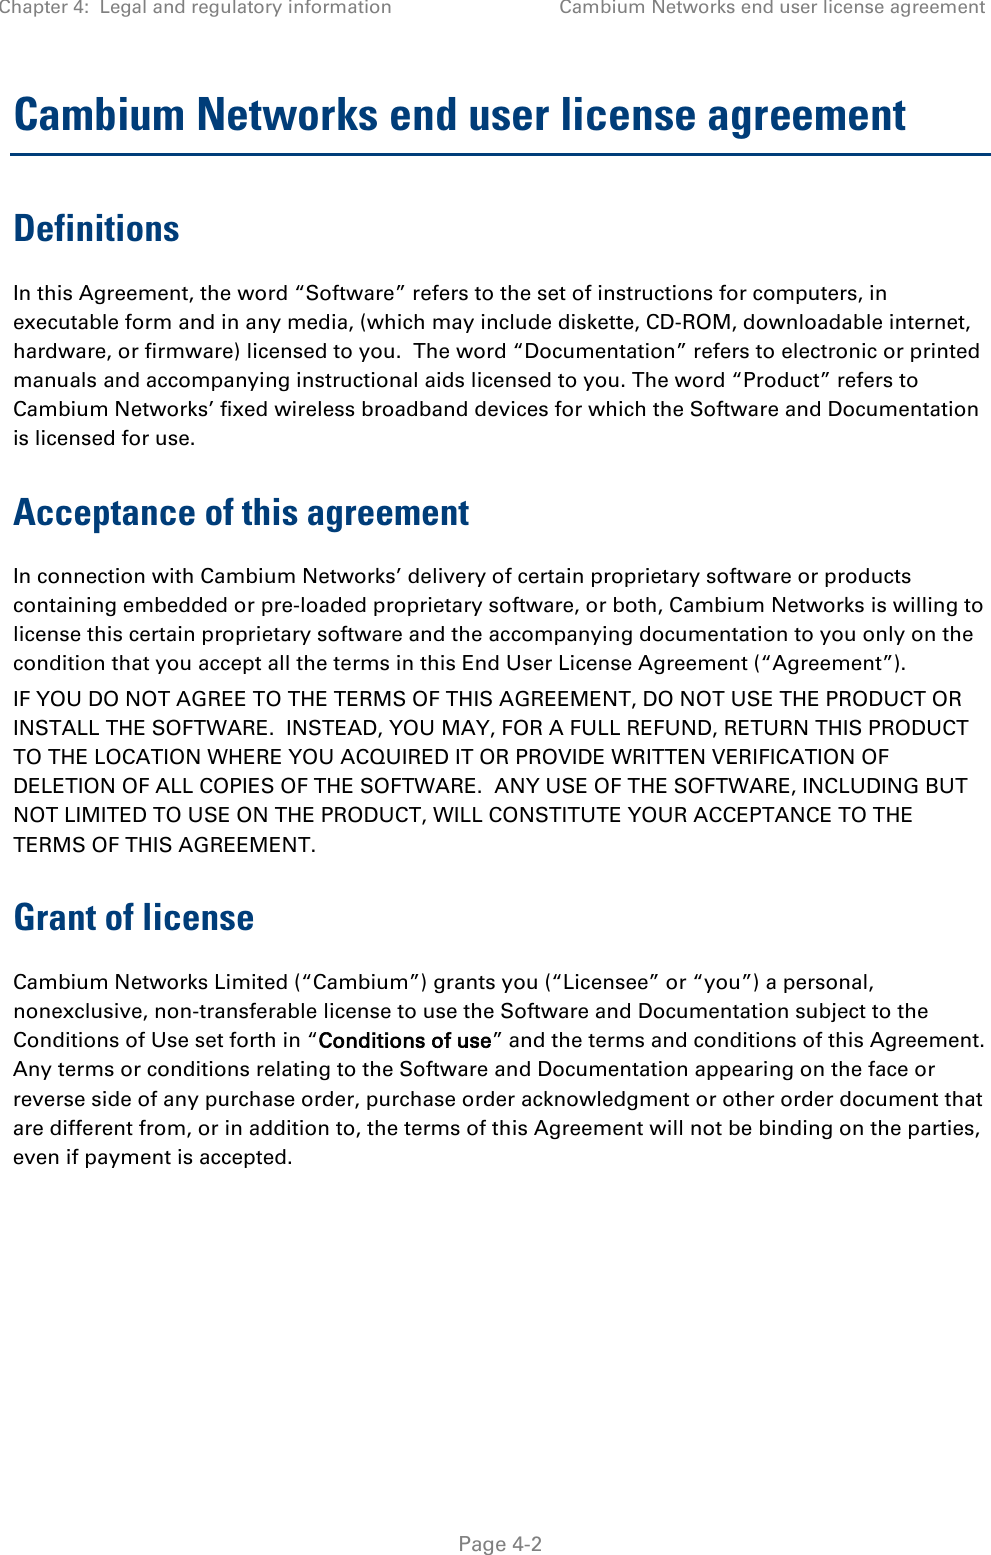 Chapter 4:  Legal and regulatory information Cambium Networks end user license agreement   Page 4-2 Cambium Networks end user license agreement Definitions In this Agreement, the word “Software” refers to the set of instructions for computers, in executable form and in any media, (which may include diskette, CD-ROM, downloadable internet, hardware, or firmware) licensed to you.  The word “Documentation” refers to electronic or printed manuals and accompanying instructional aids licensed to you. The word “Product” refers to Cambium Networks’ fixed wireless broadband devices for which the Software and Documentation is licensed for use. Acceptance of this agreement In connection with Cambium Networks’ delivery of certain proprietary software or products containing embedded or pre-loaded proprietary software, or both, Cambium Networks is willing to license this certain proprietary software and the accompanying documentation to you only on the condition that you accept all the terms in this End User License Agreement (“Agreement”). IF YOU DO NOT AGREE TO THE TERMS OF THIS AGREEMENT, DO NOT USE THE PRODUCT OR INSTALL THE SOFTWARE.  INSTEAD, YOU MAY, FOR A FULL REFUND, RETURN THIS PRODUCT TO THE LOCATION WHERE YOU ACQUIRED IT OR PROVIDE WRITTEN VERIFICATION OF DELETION OF ALL COPIES OF THE SOFTWARE.  ANY USE OF THE SOFTWARE, INCLUDING BUT NOT LIMITED TO USE ON THE PRODUCT, WILL CONSTITUTE YOUR ACCEPTANCE TO THE TERMS OF THIS AGREEMENT.  Grant of license Cambium Networks Limited (“Cambium”) grants you (“Licensee” or “you”) a personal, nonexclusive, non-transferable license to use the Software and Documentation subject to the Conditions of Use set forth in “Conditions of use” and the terms and conditions of this Agreement.  Any terms or conditions relating to the Software and Documentation appearing on the face or reverse side of any purchase order, purchase order acknowledgment or other order document that are different from, or in addition to, the terms of this Agreement will not be binding on the parties, even if payment is accepted. 